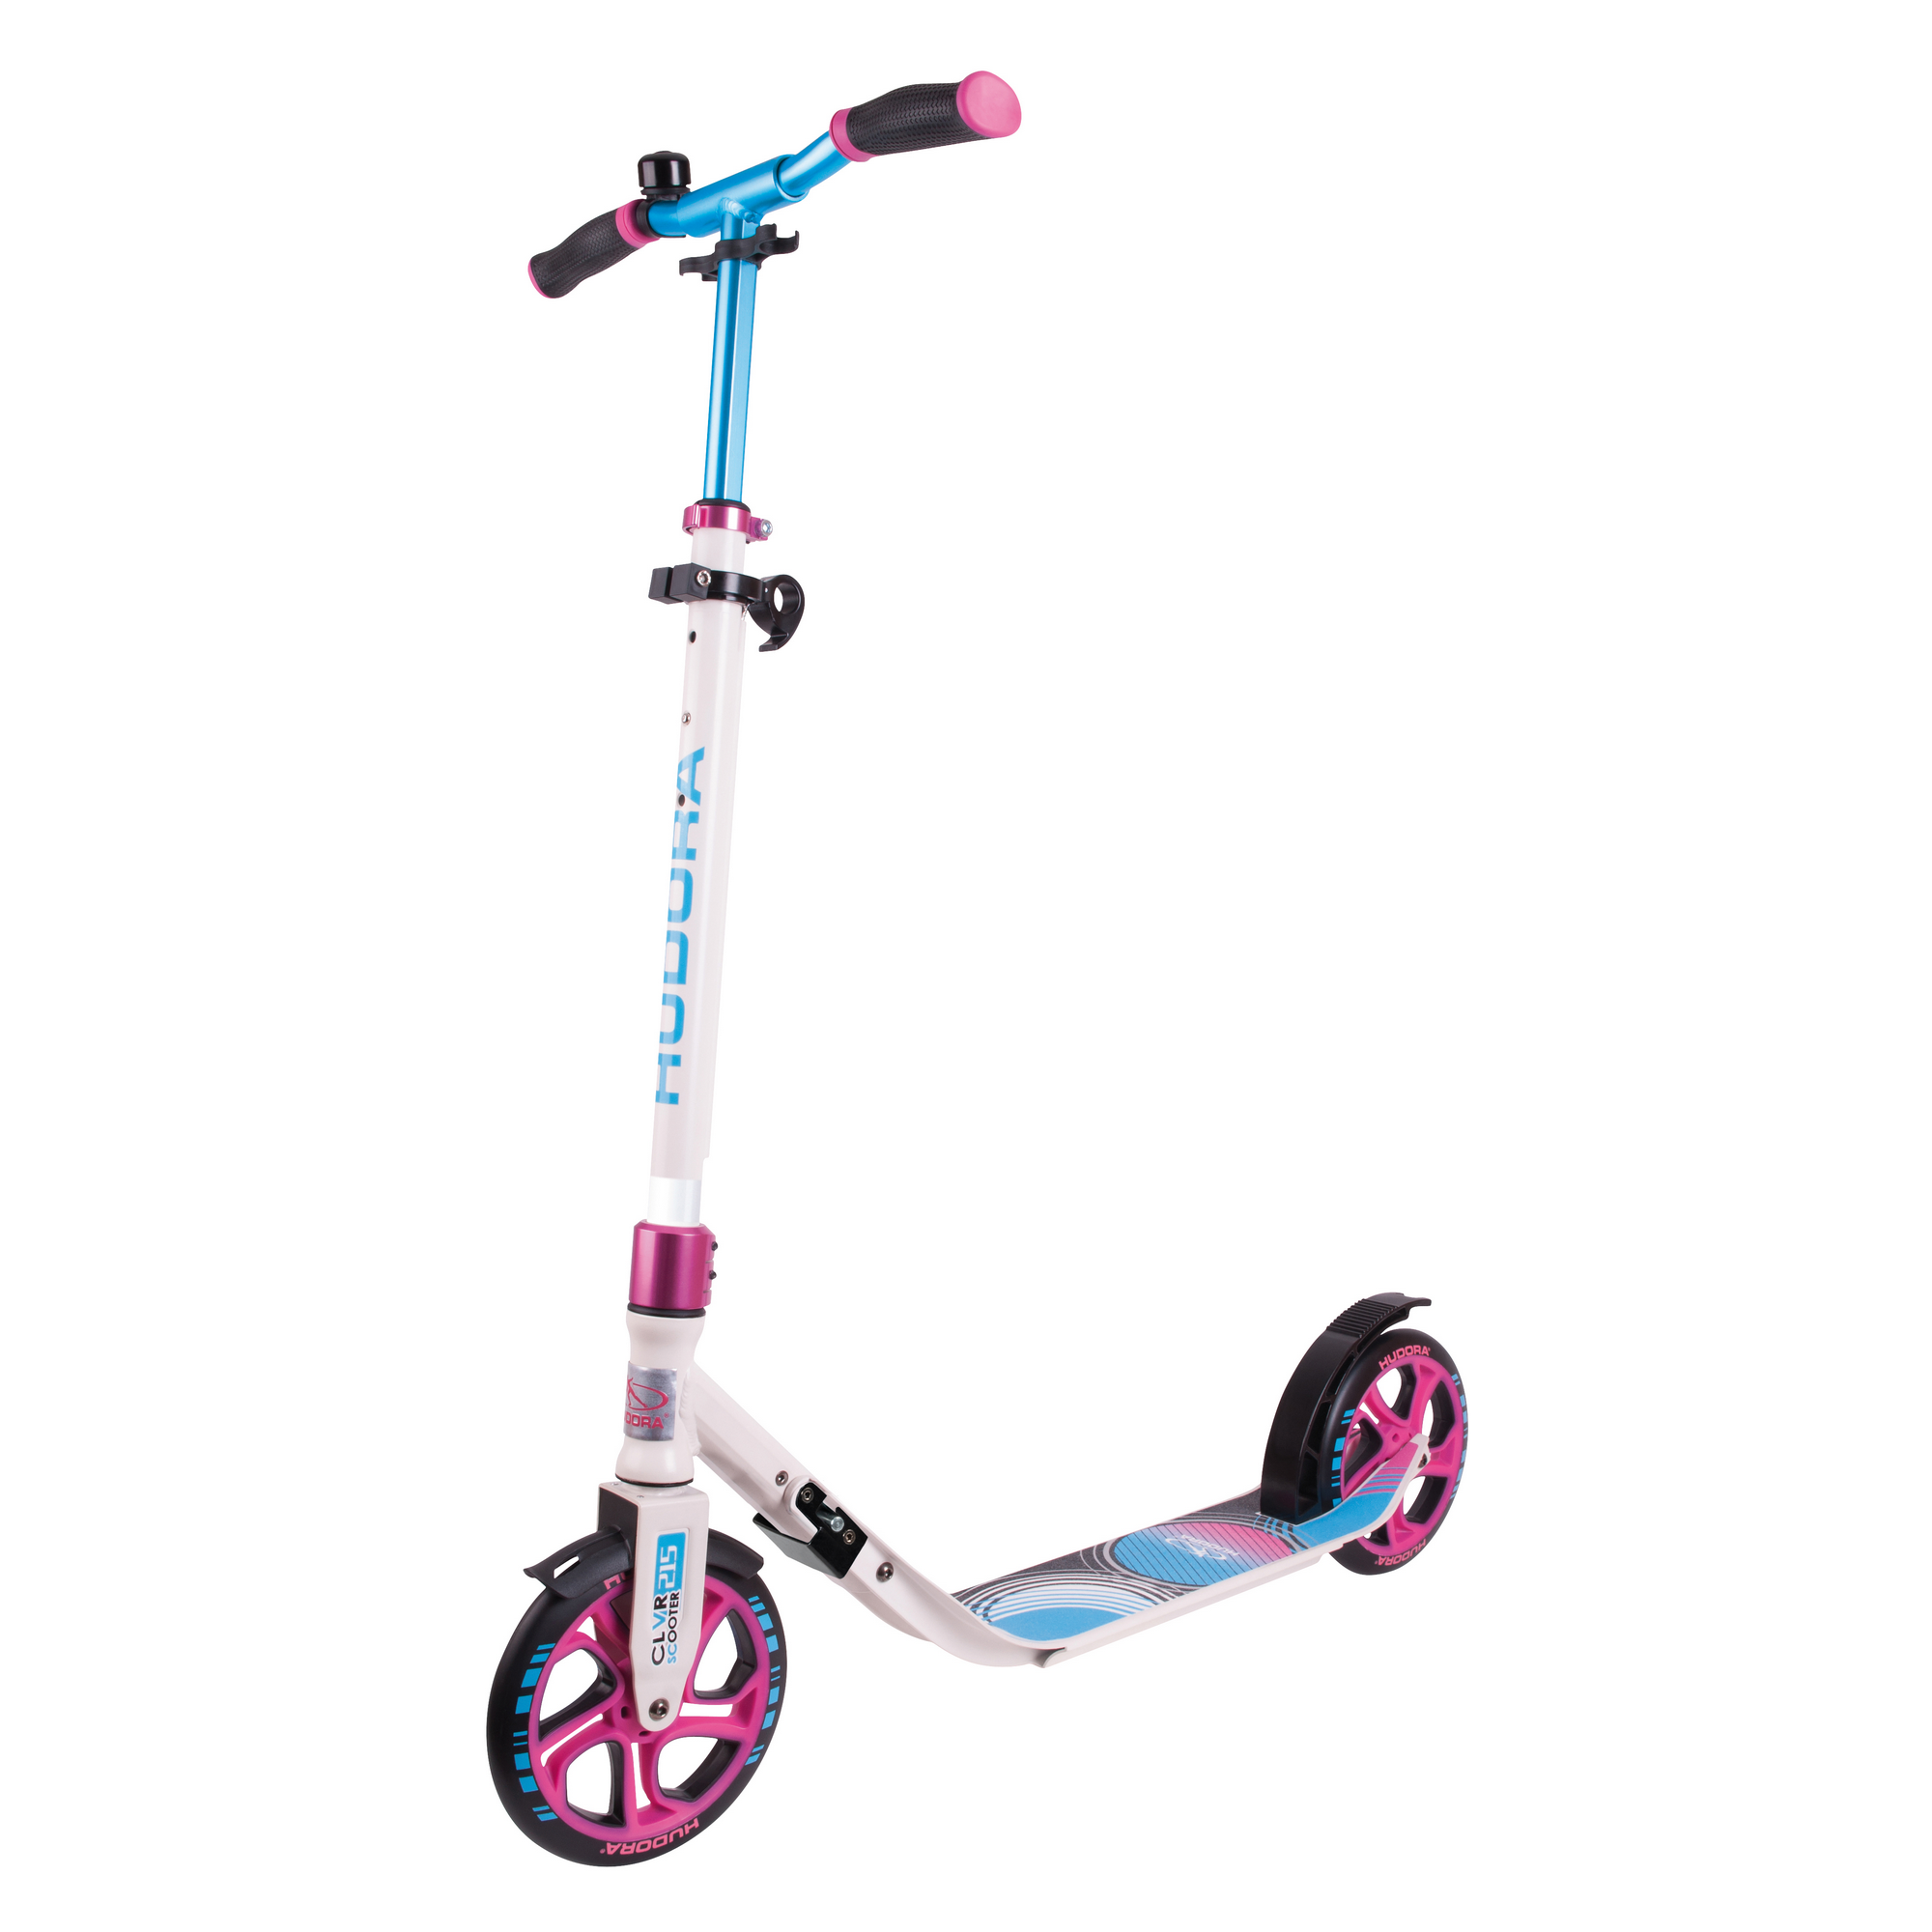 Scooter CLVR 215, blau/pink + product picture